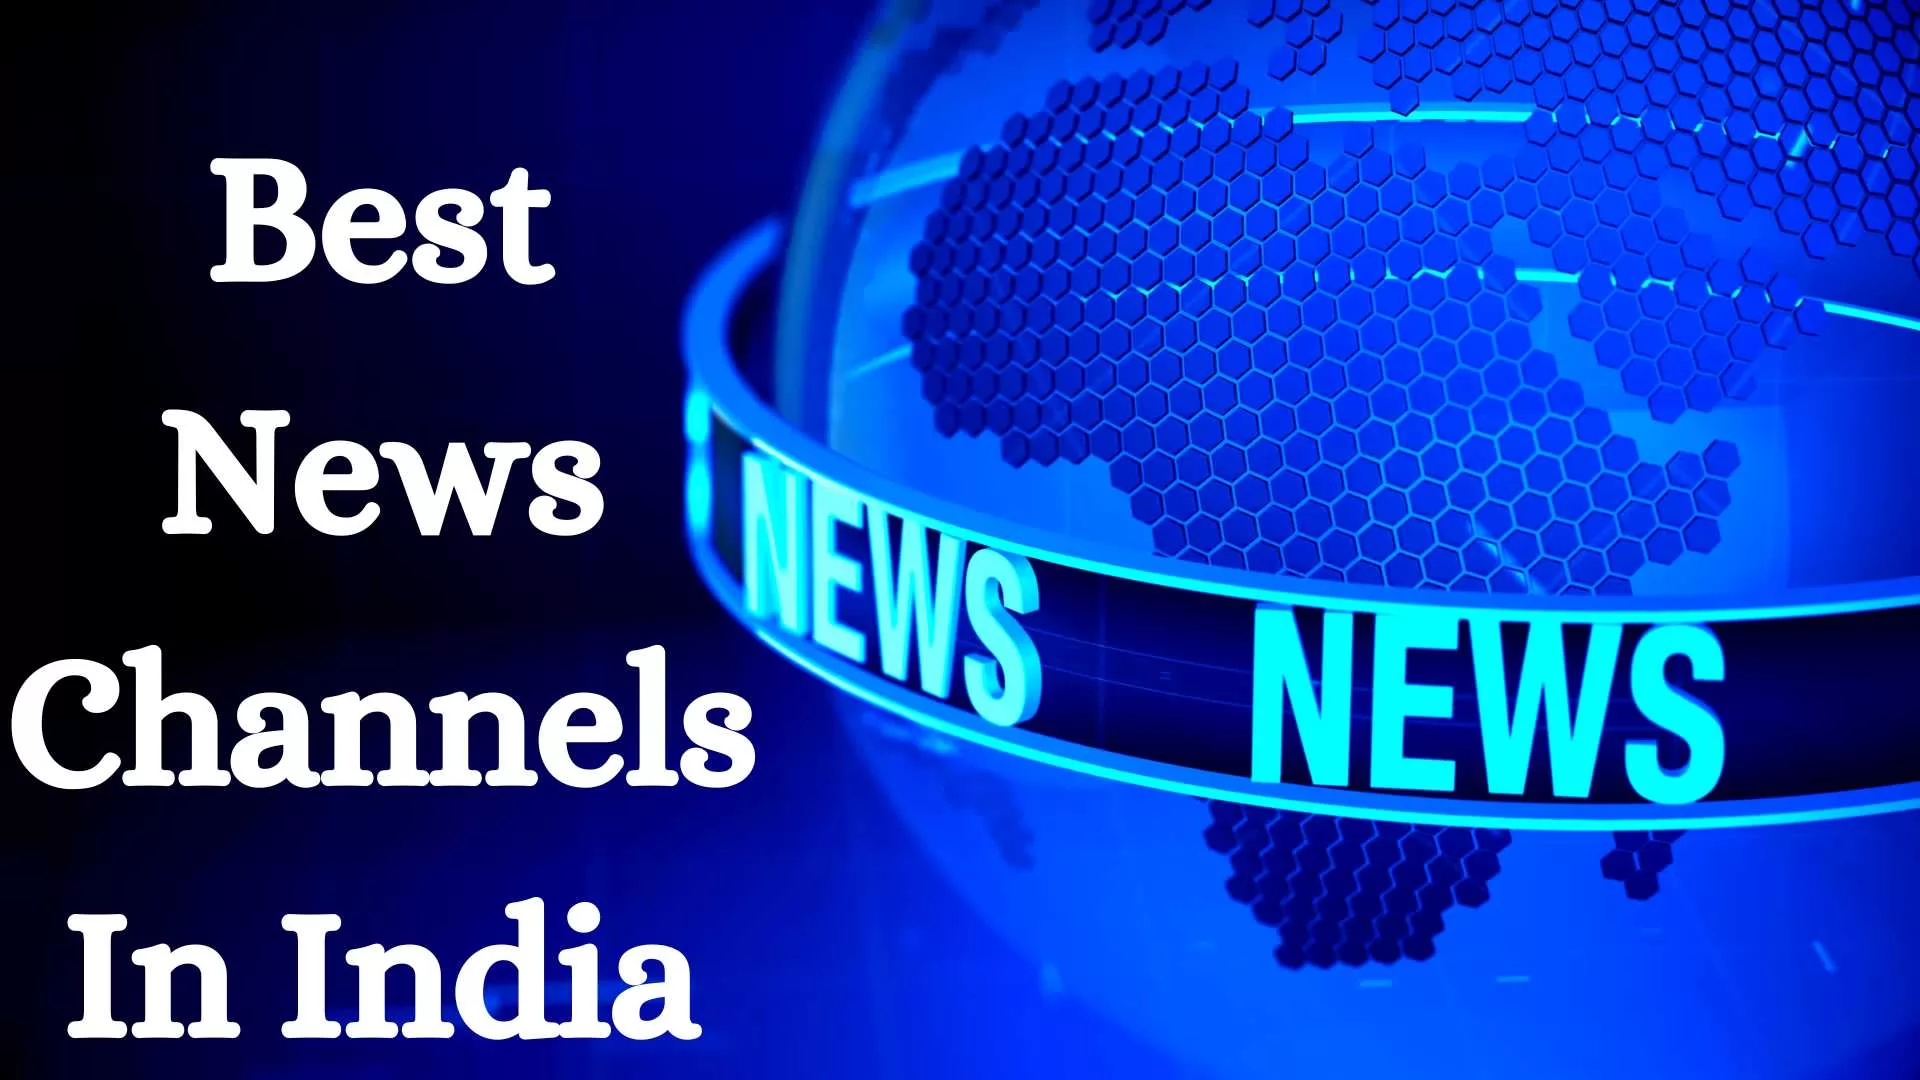 Best News Channels In India